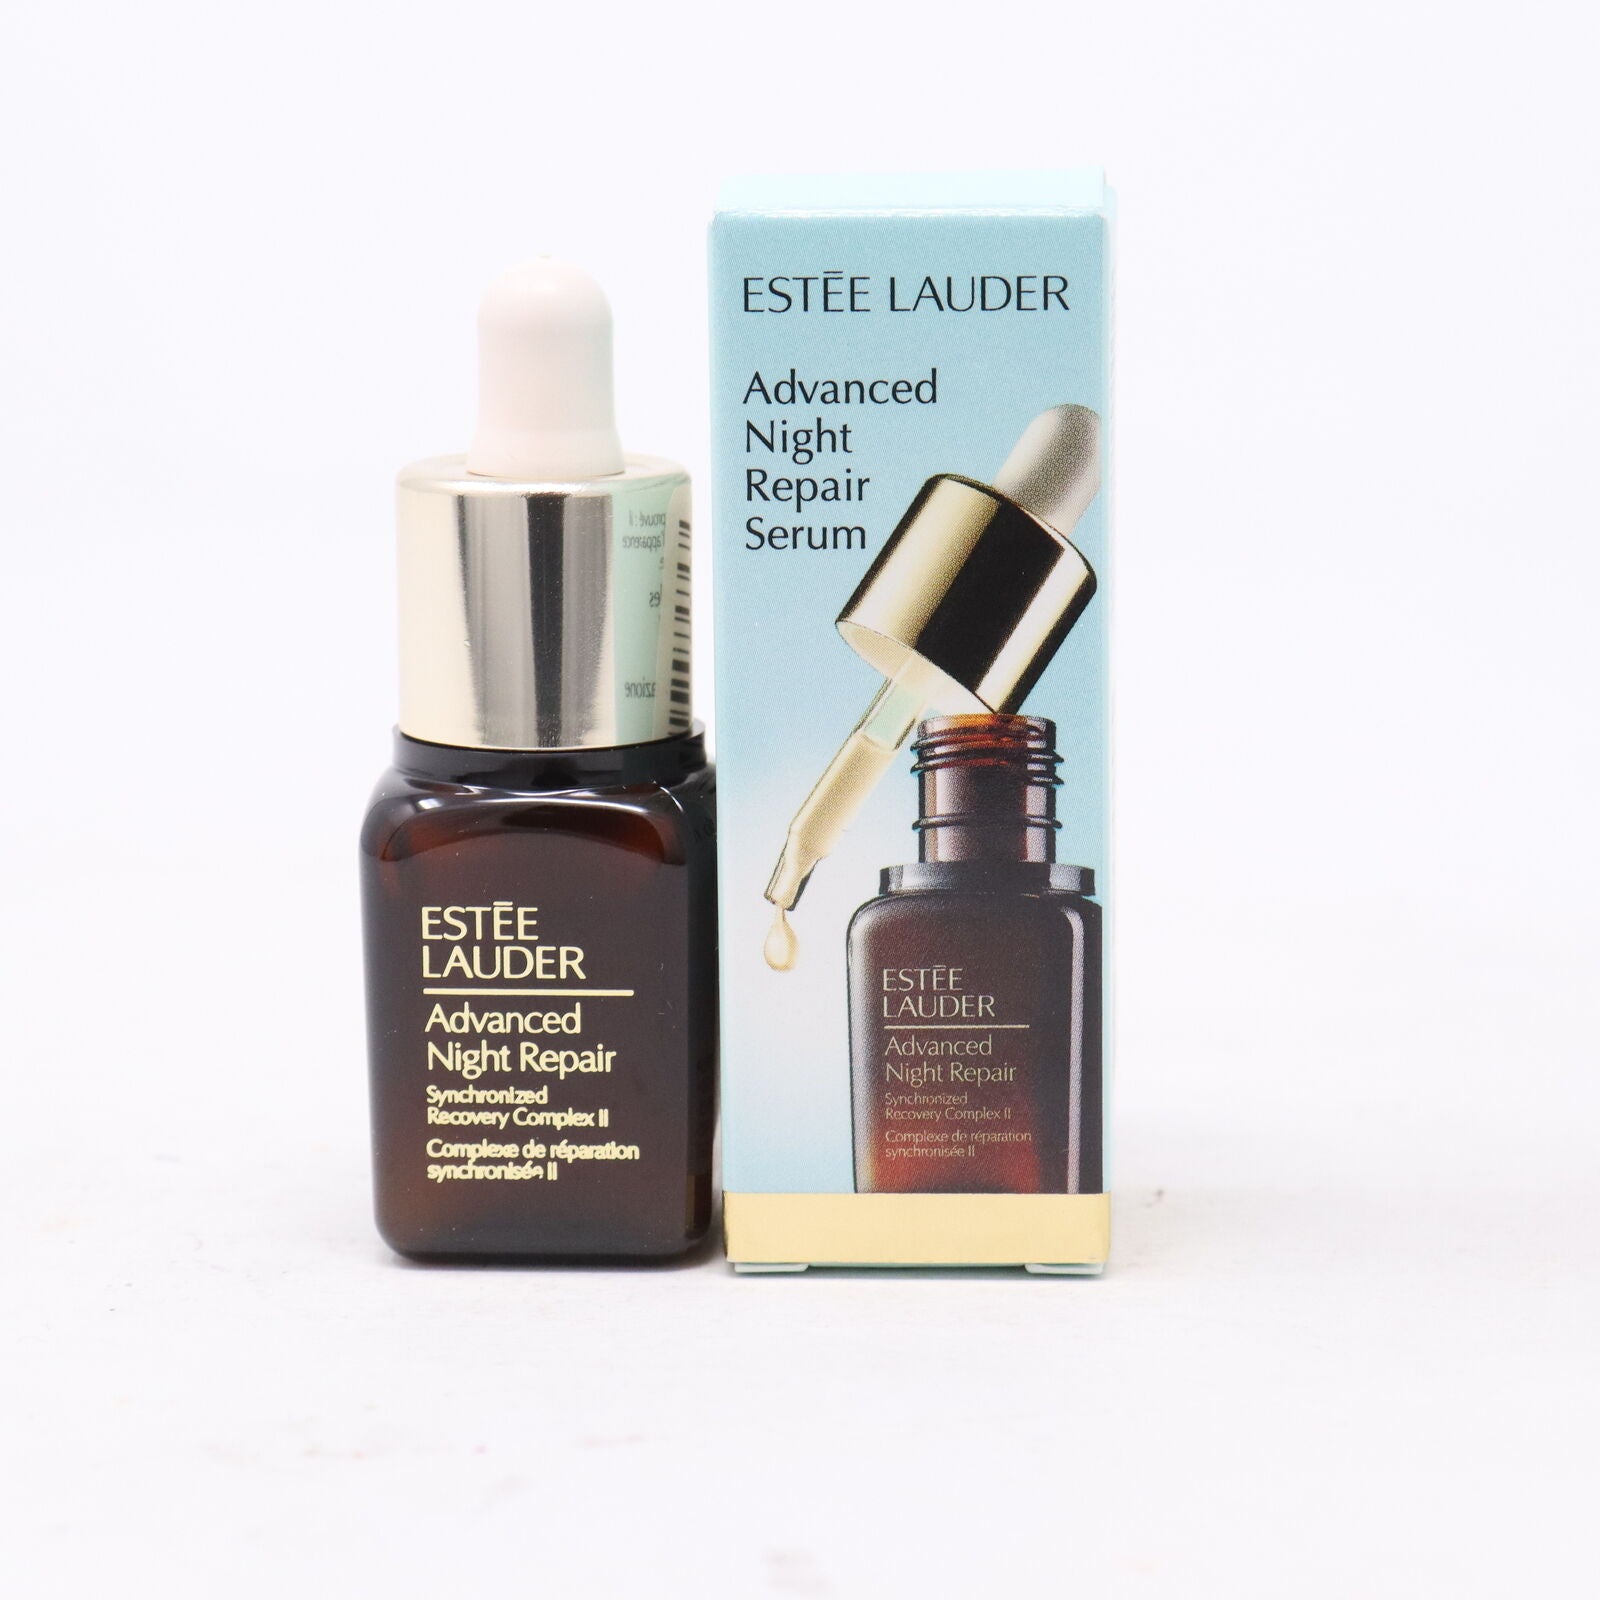 Estee Lauder Advanced Night Repair - Synchronized Recovery Complex II - 0.24 oz - Travel Size